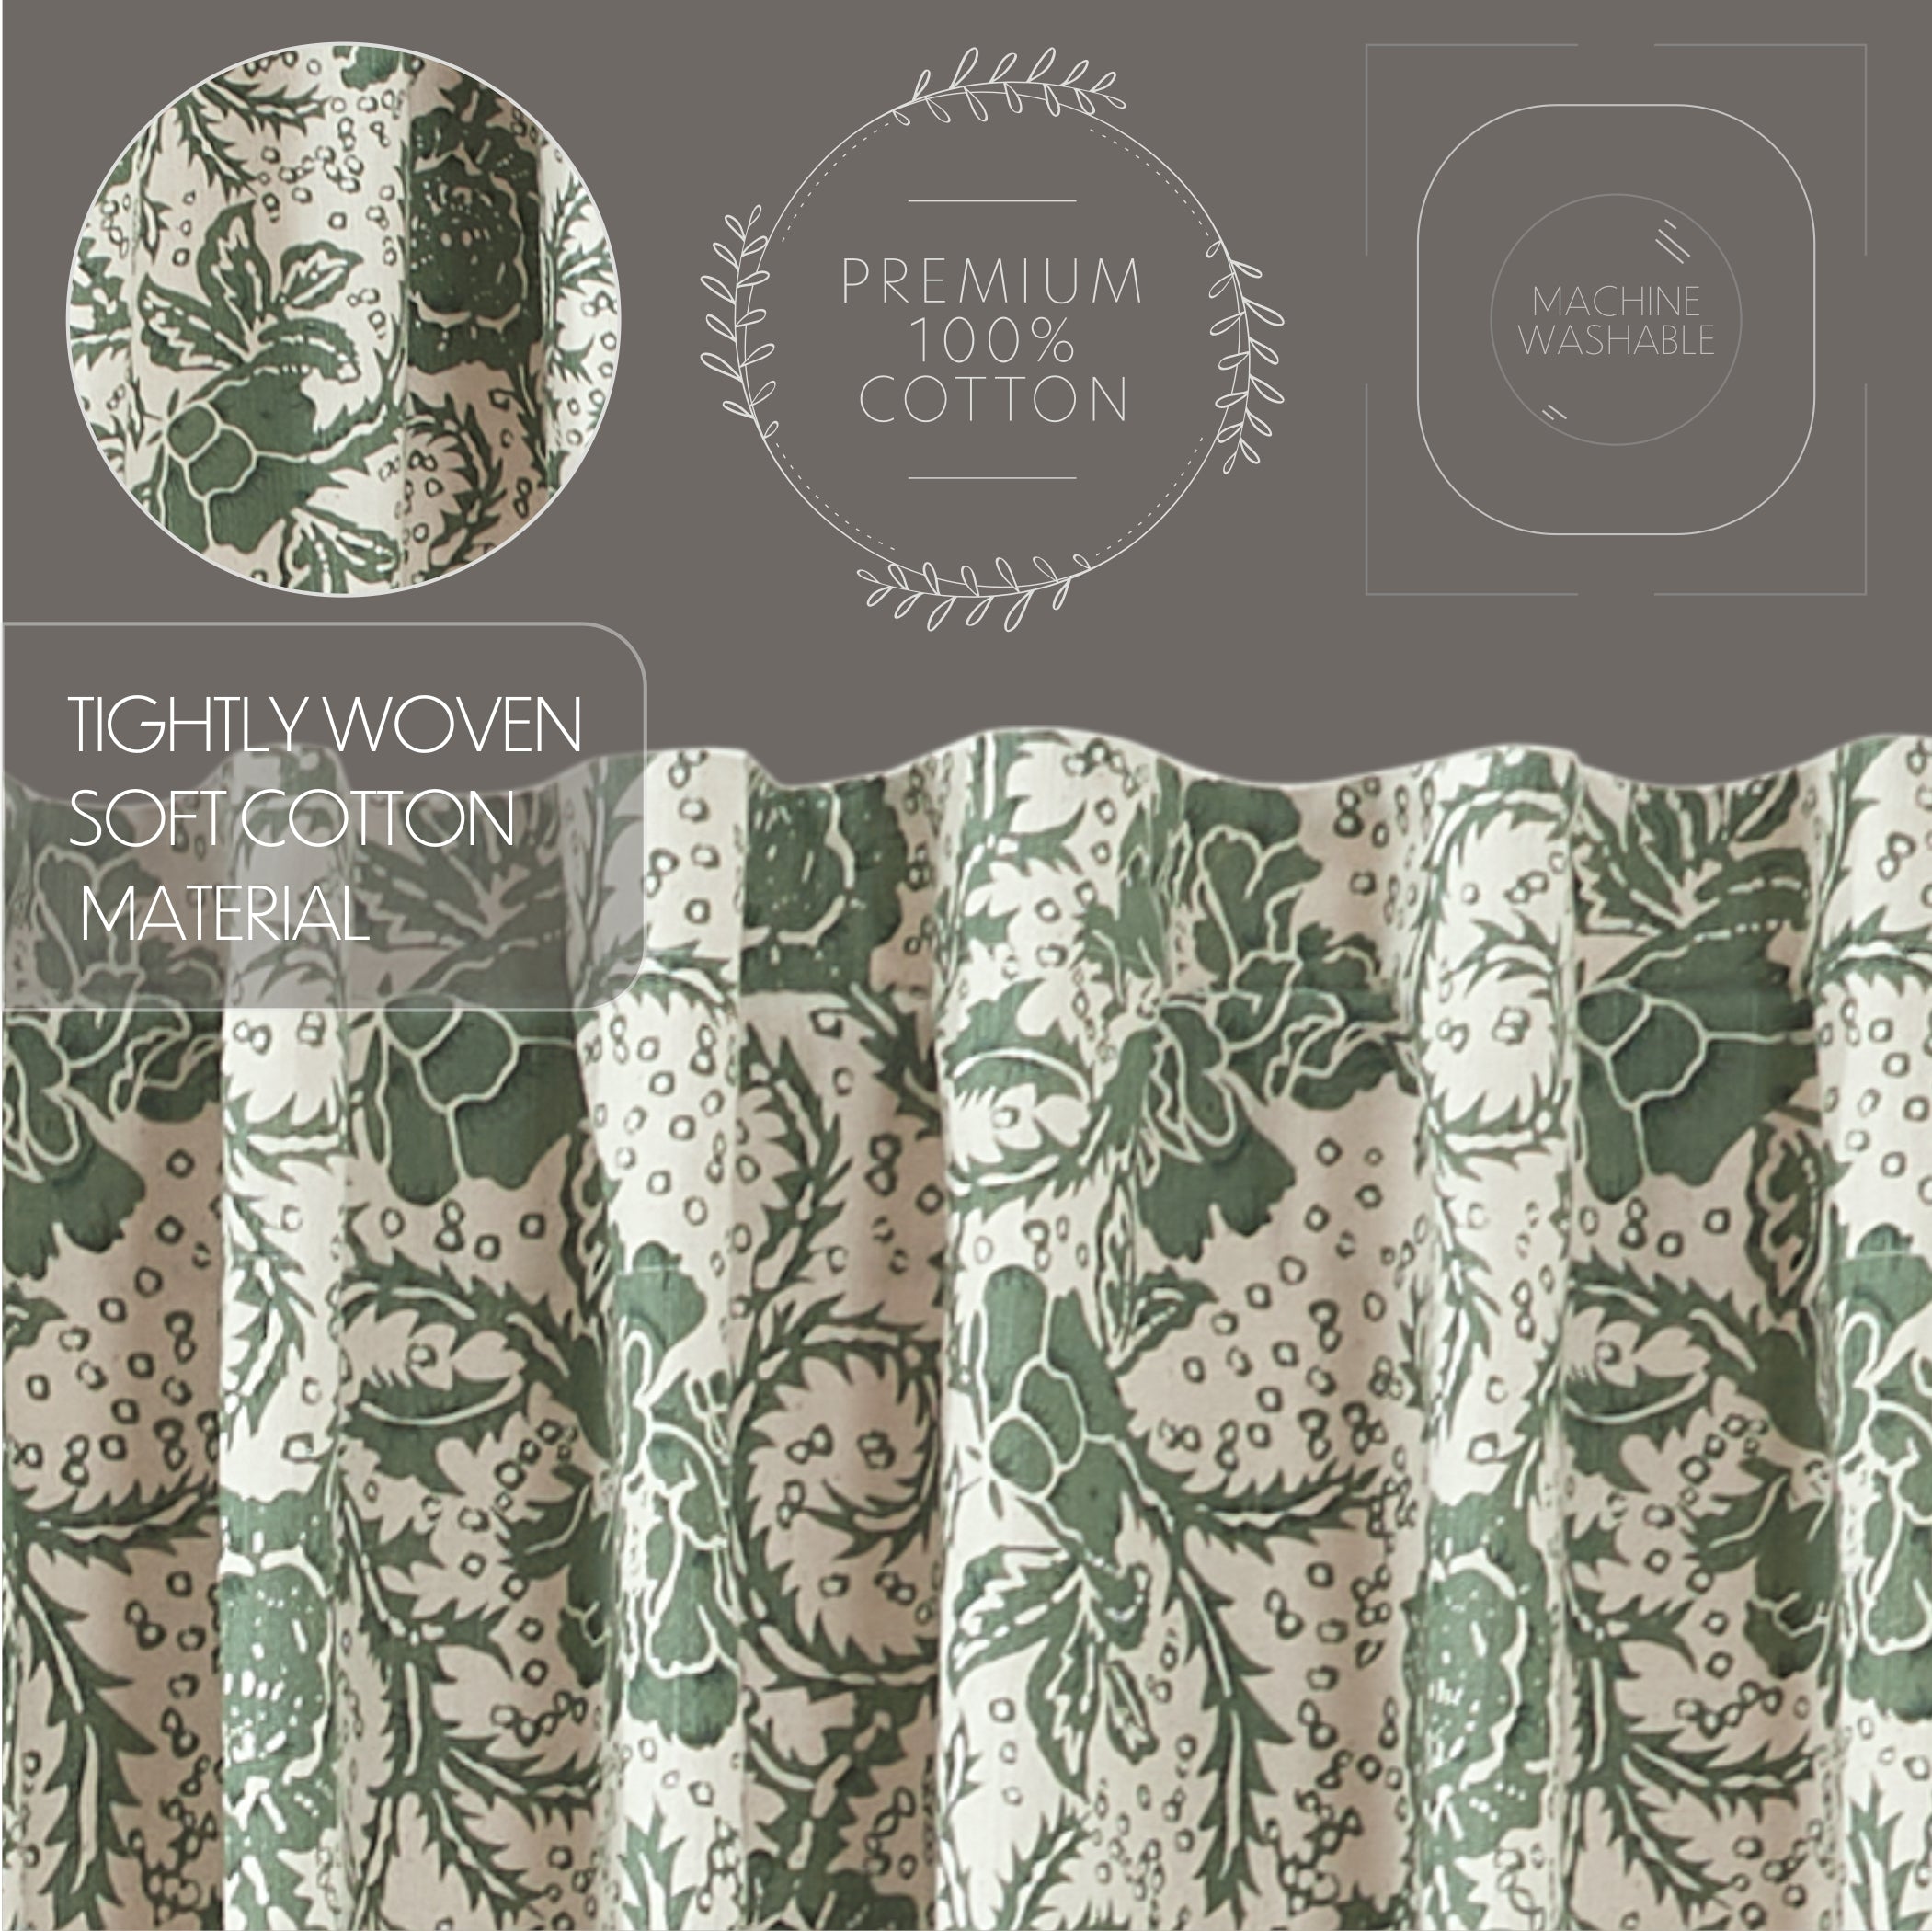 Dorset Green Floral Panel Curtain Set of 2 84x40 VHC Brands